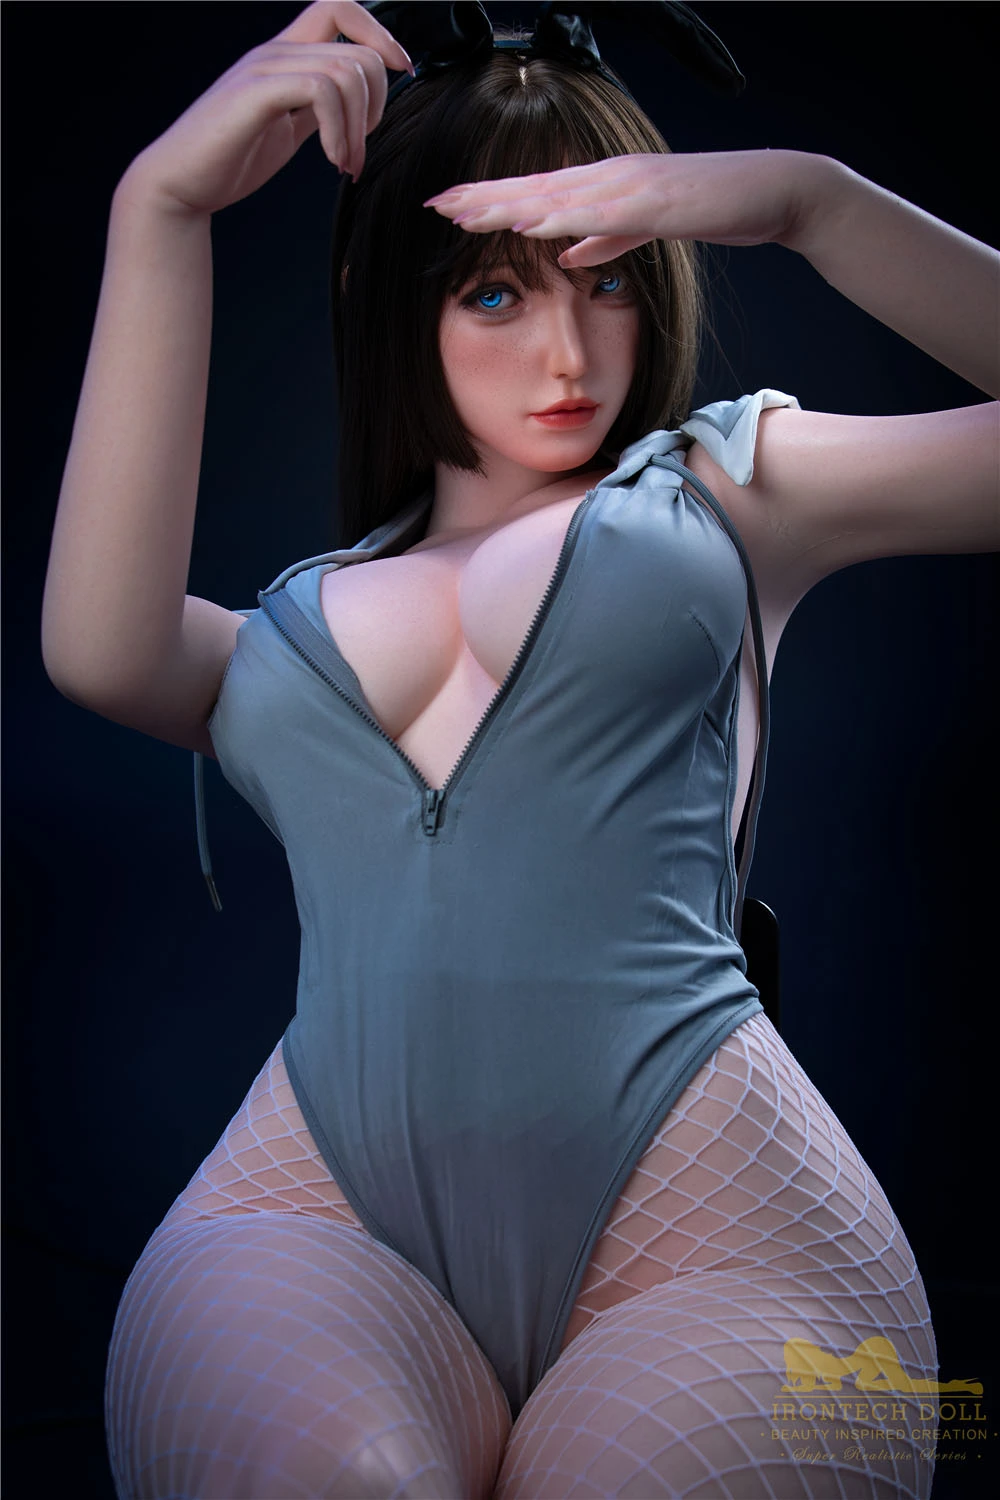  full size girl sex doll wearing jumpsuit